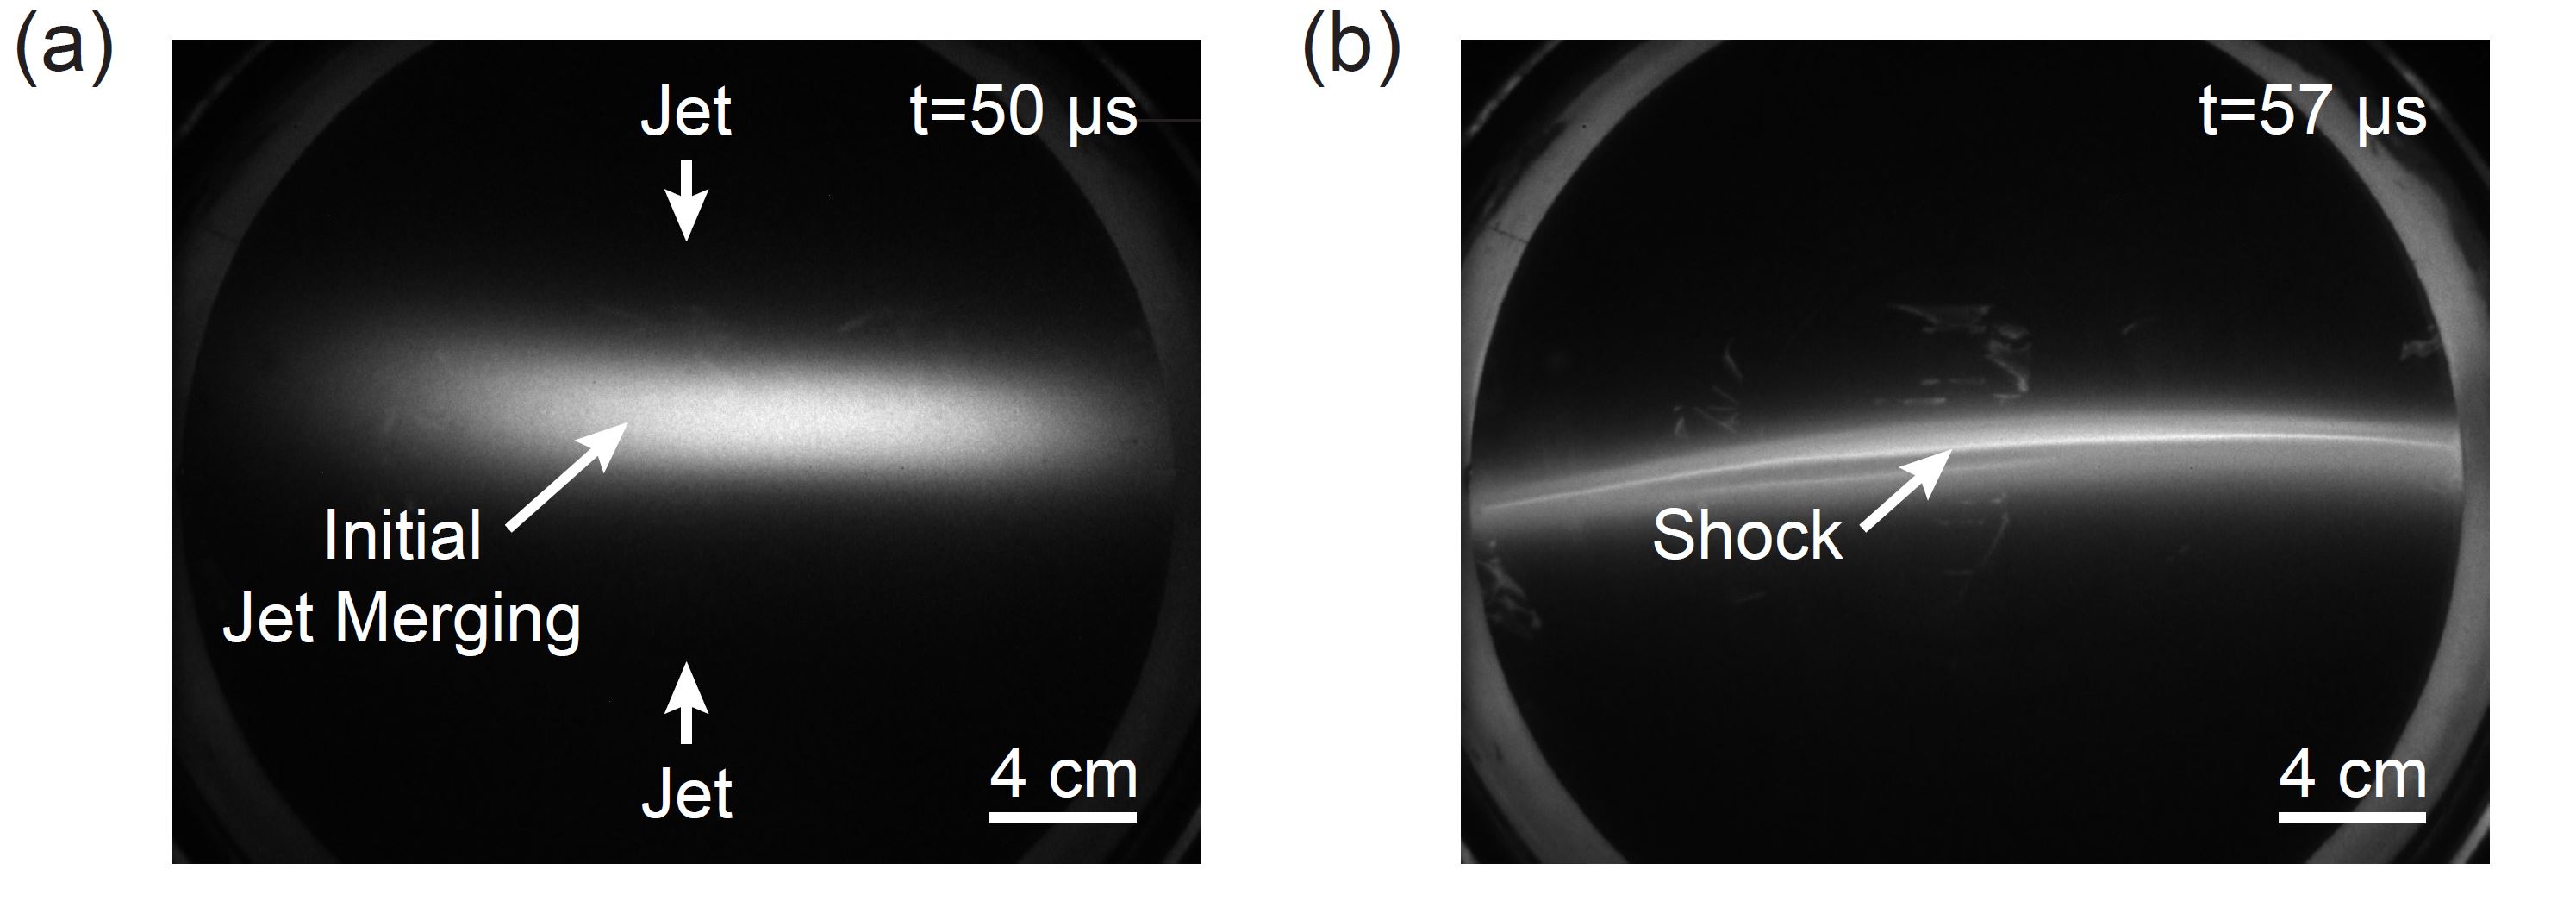 Fast camera images of shock formation at 50 and 57 microseconds